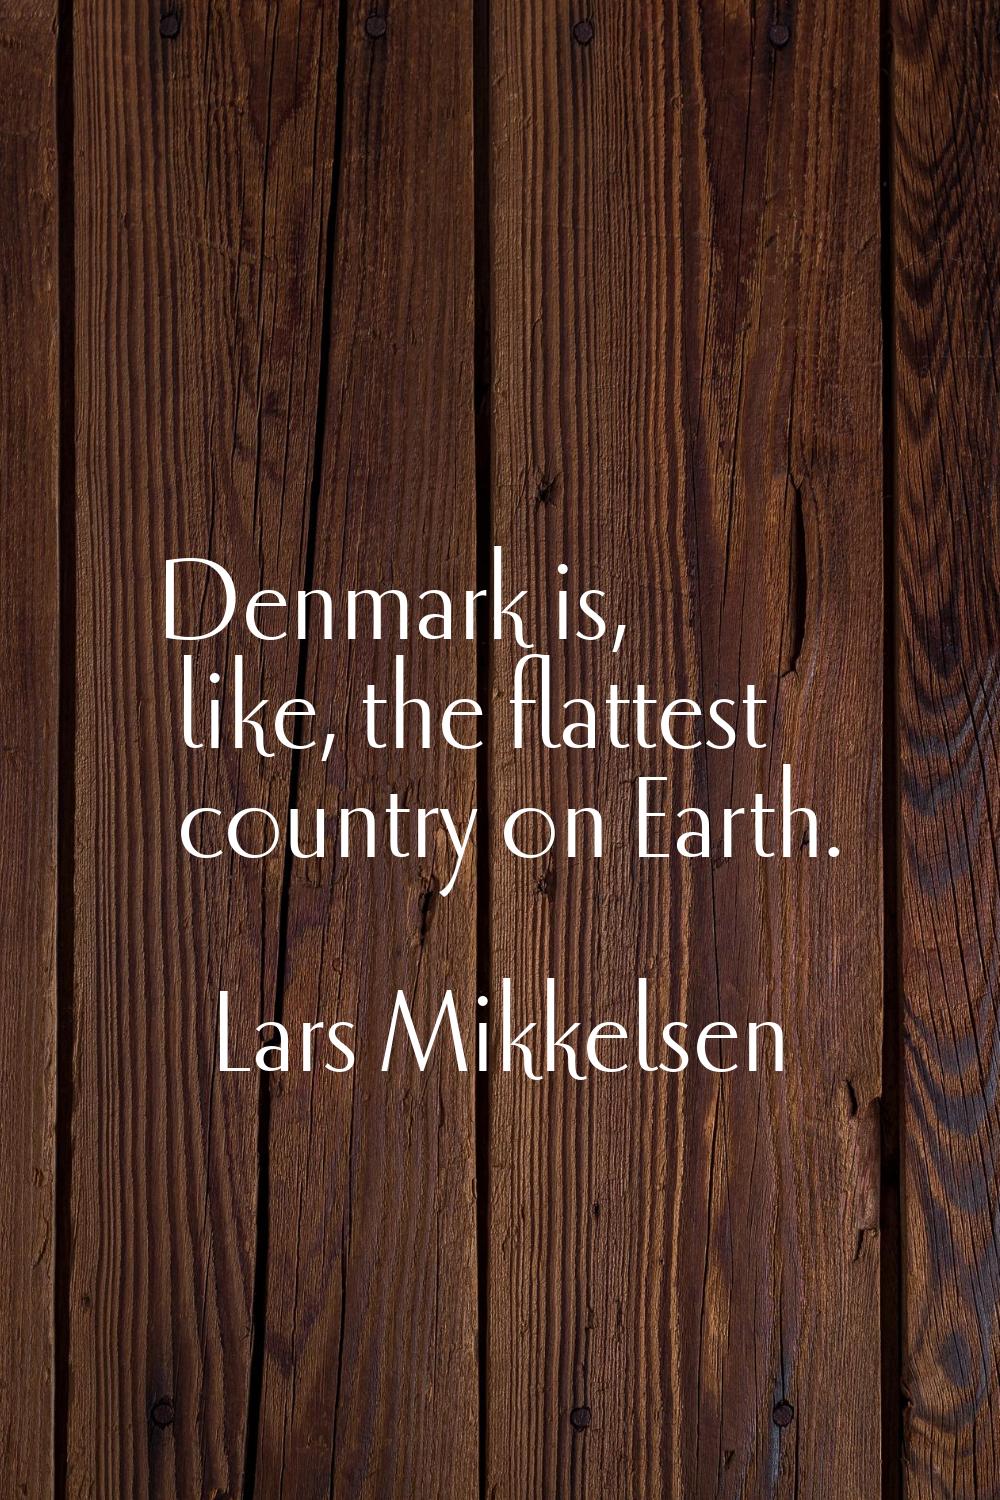 Denmark is, like, the flattest country on Earth.